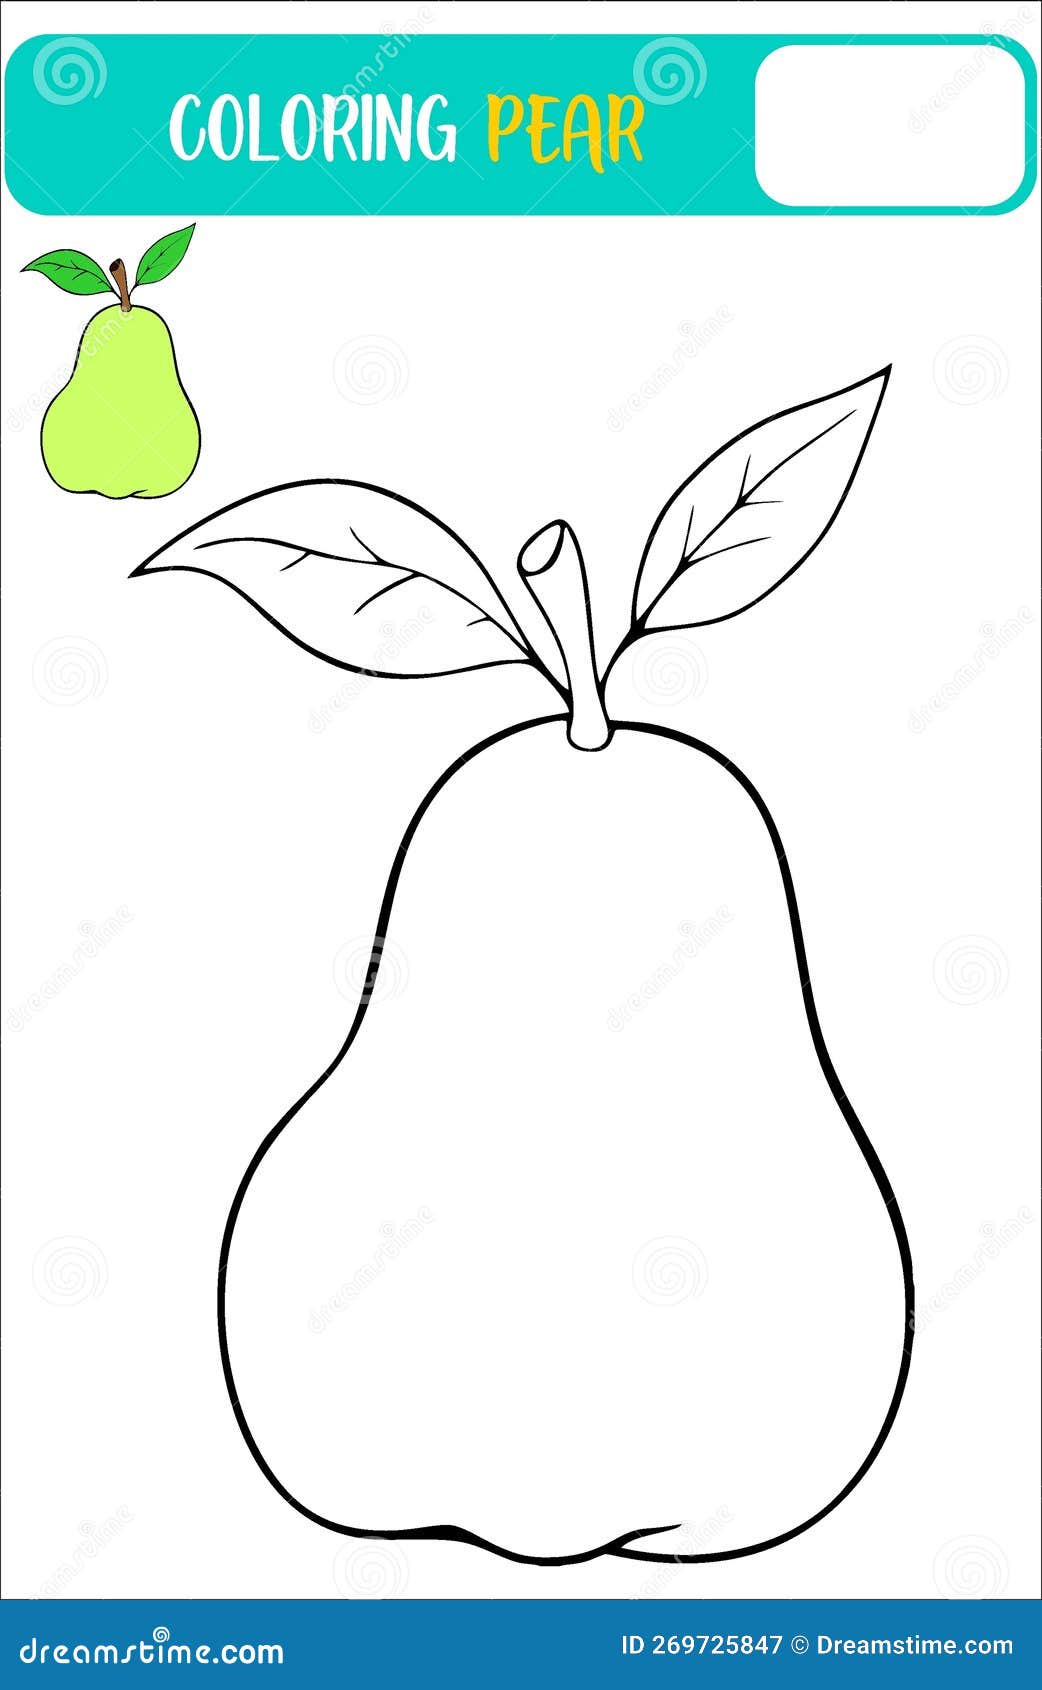 Coloring page pear fruit stock vector. Illustration of fruit - 269725847